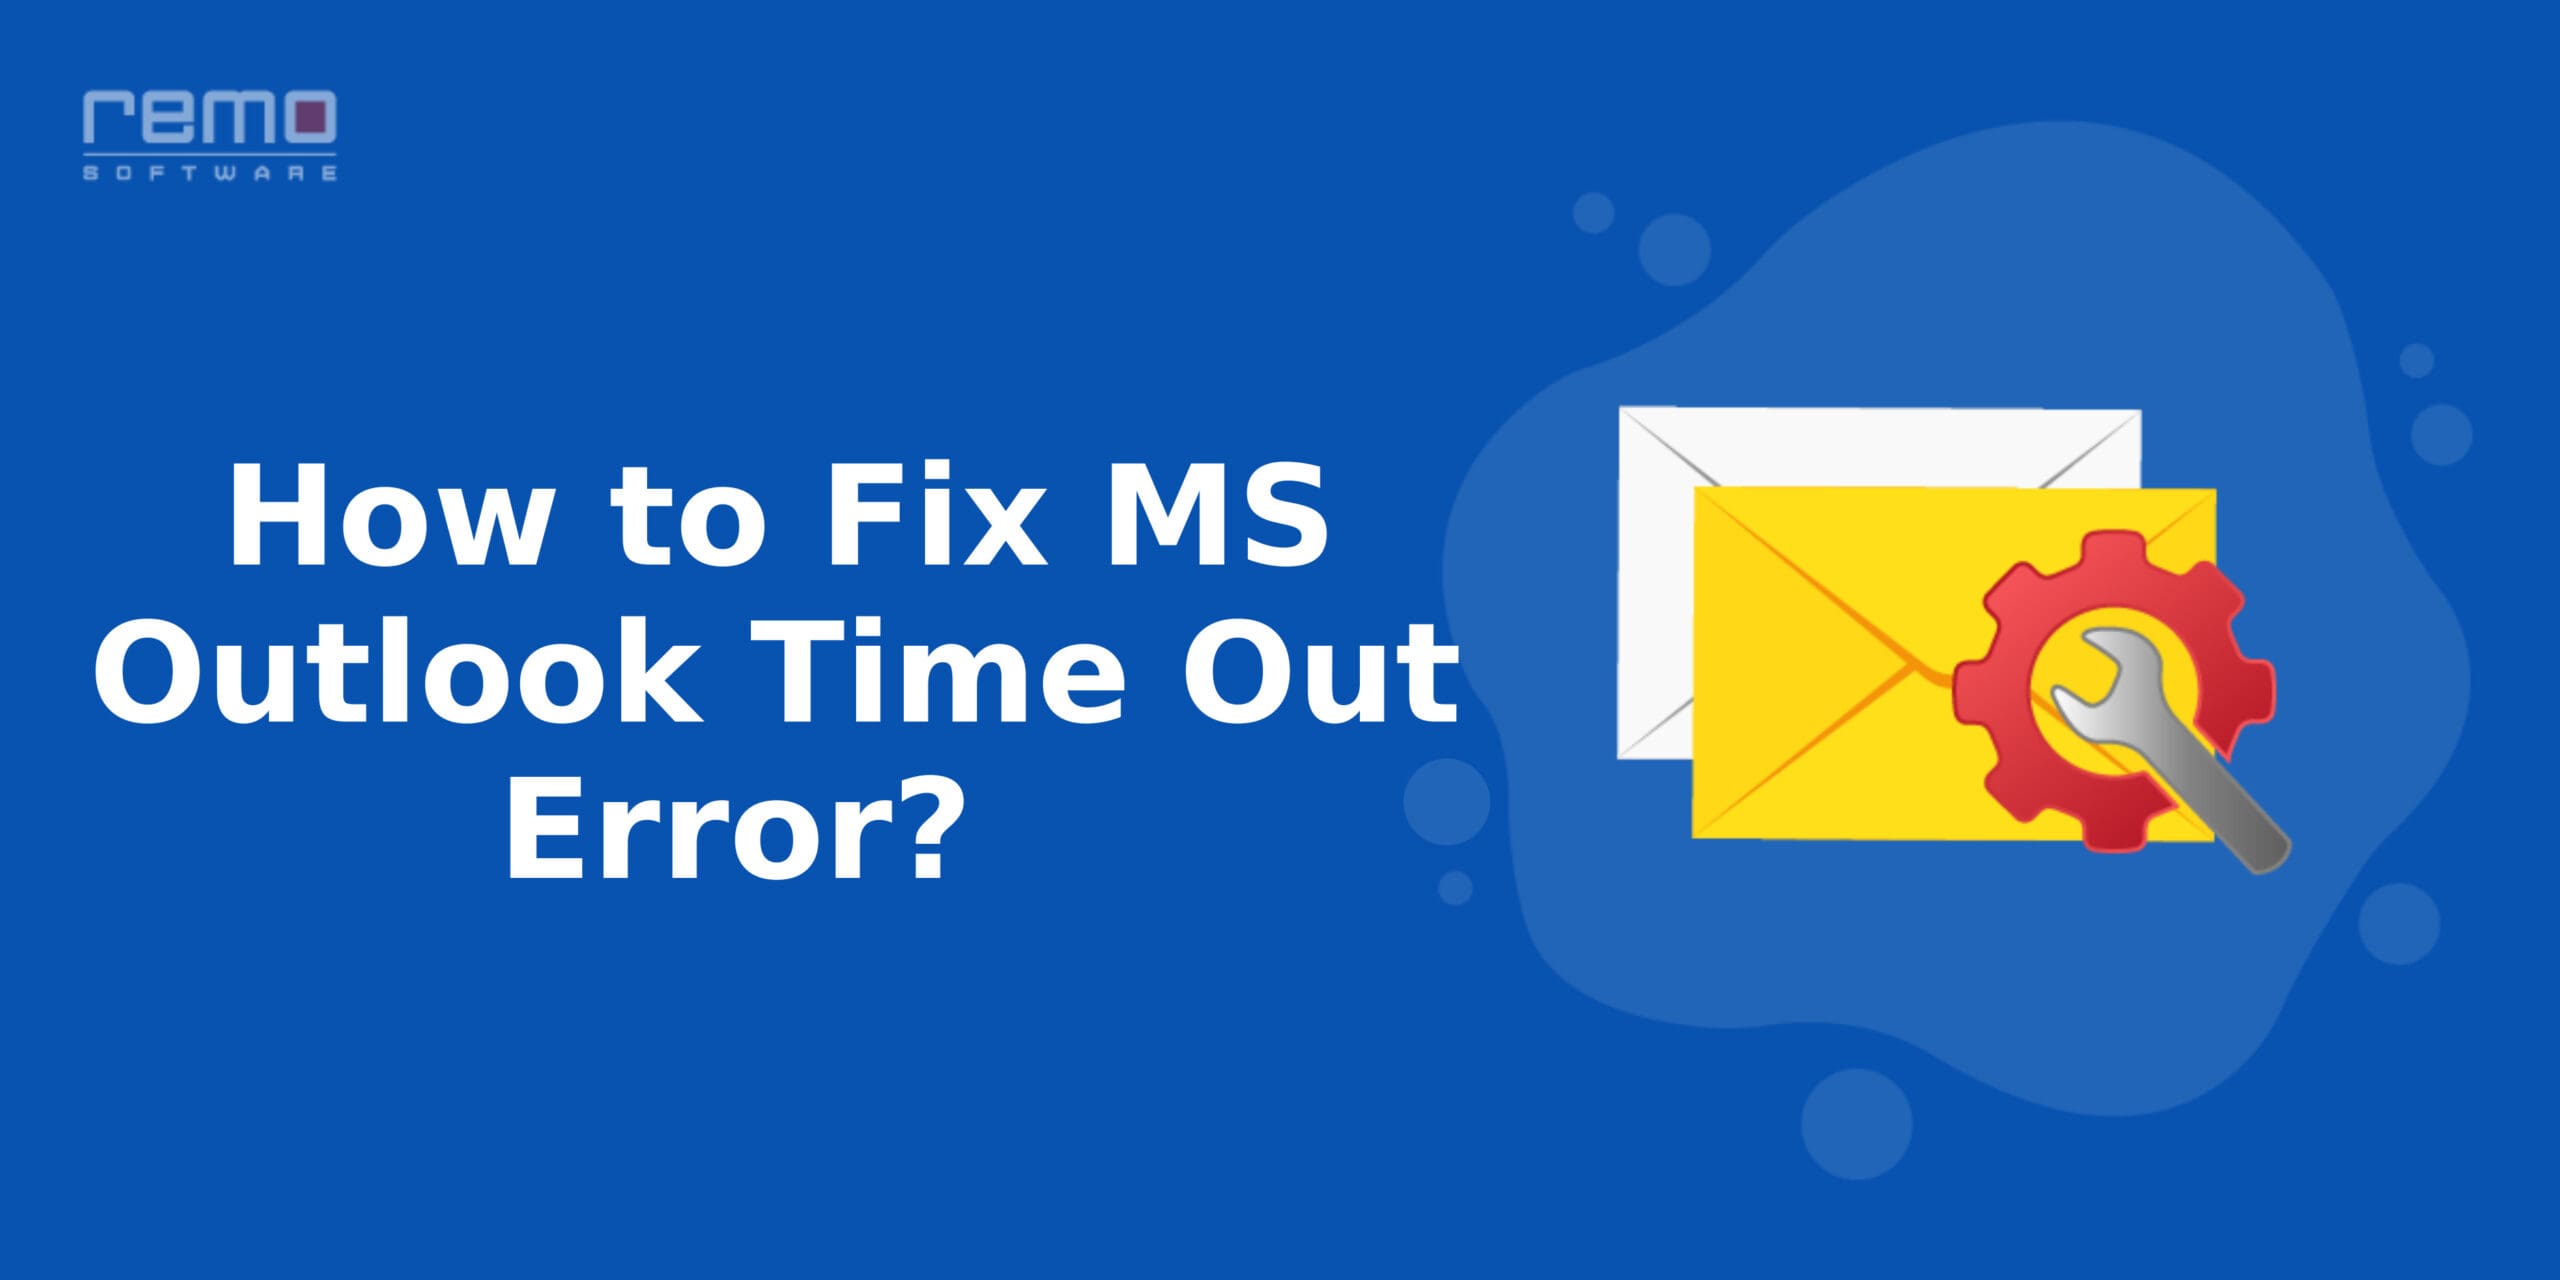 How-to-Fix-MS-Outlook-Time-Out-Error-scaled